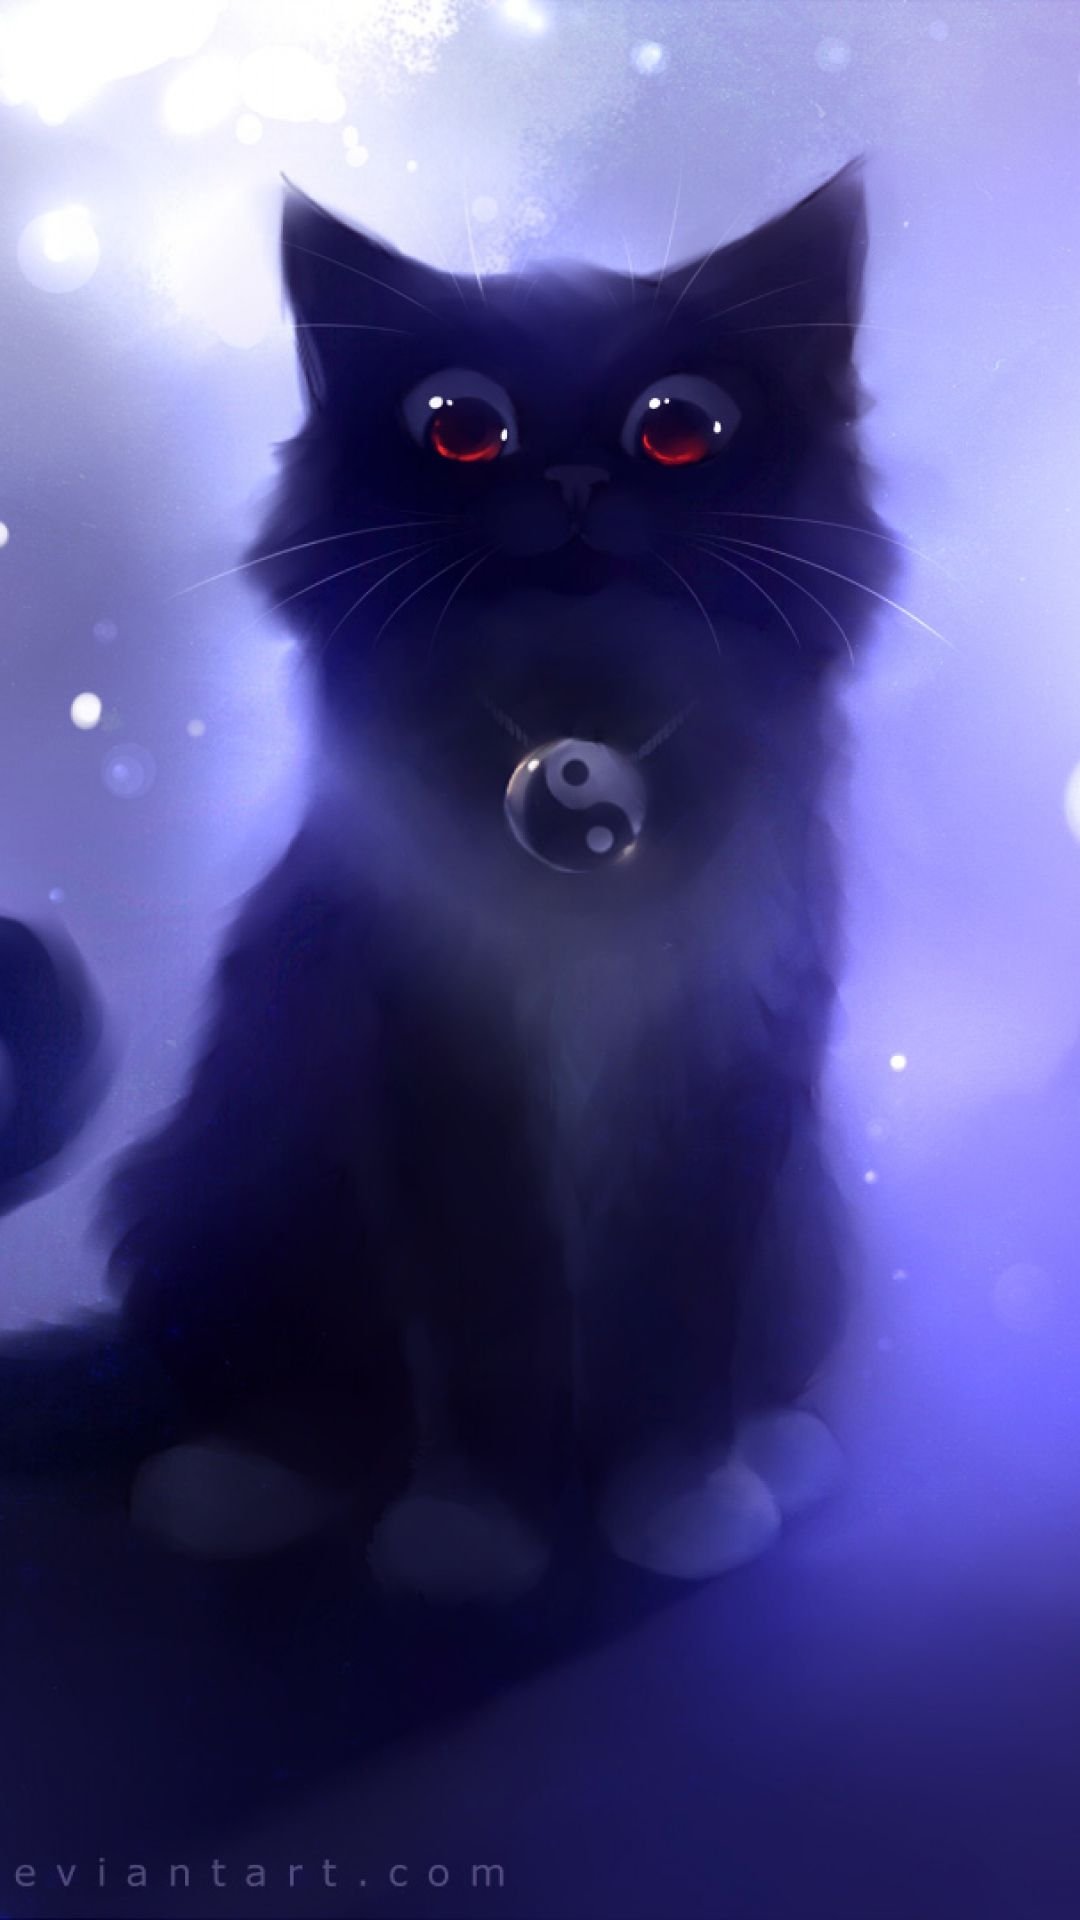 Cute anime cat Wallpapers Download | MobCup